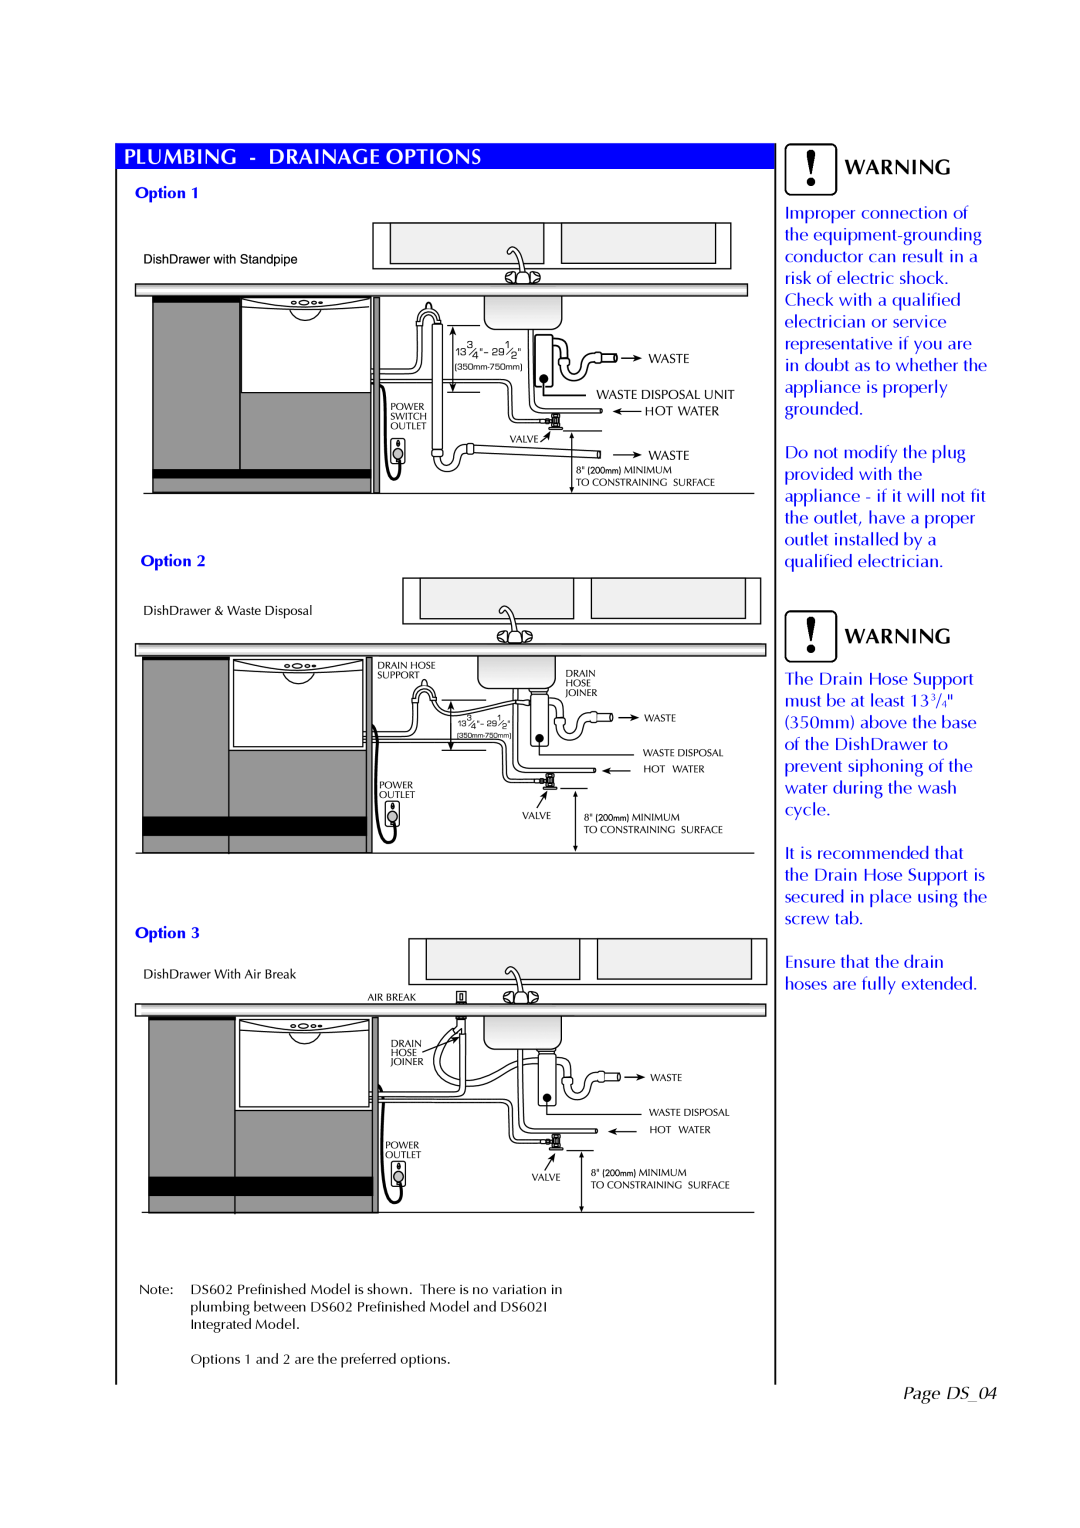 Fisher & Paykel DS602I manual Plumbing - Drainage Options, Page DS04 